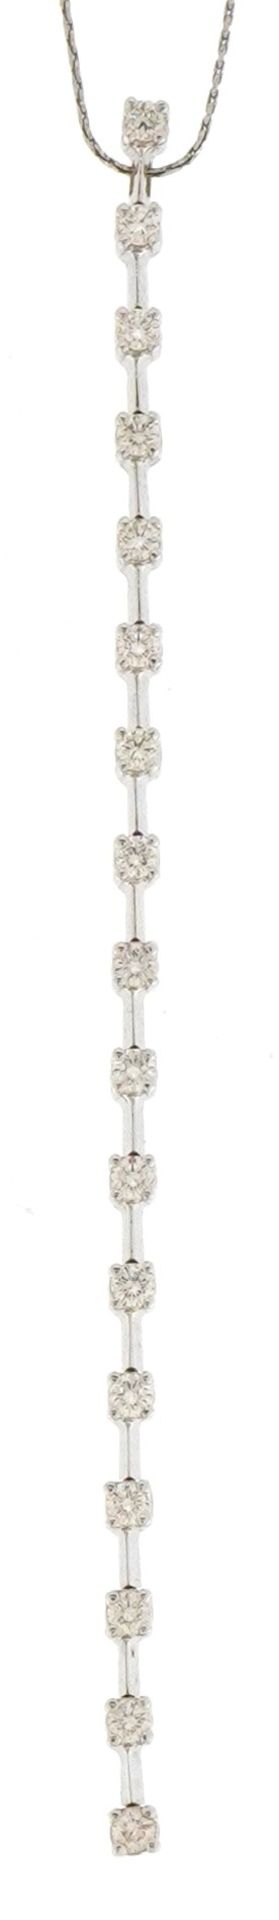 18ct white gold diamond line pendant set with seventeen diamonds on a 18ct white gold necklace, - Image 3 of 8